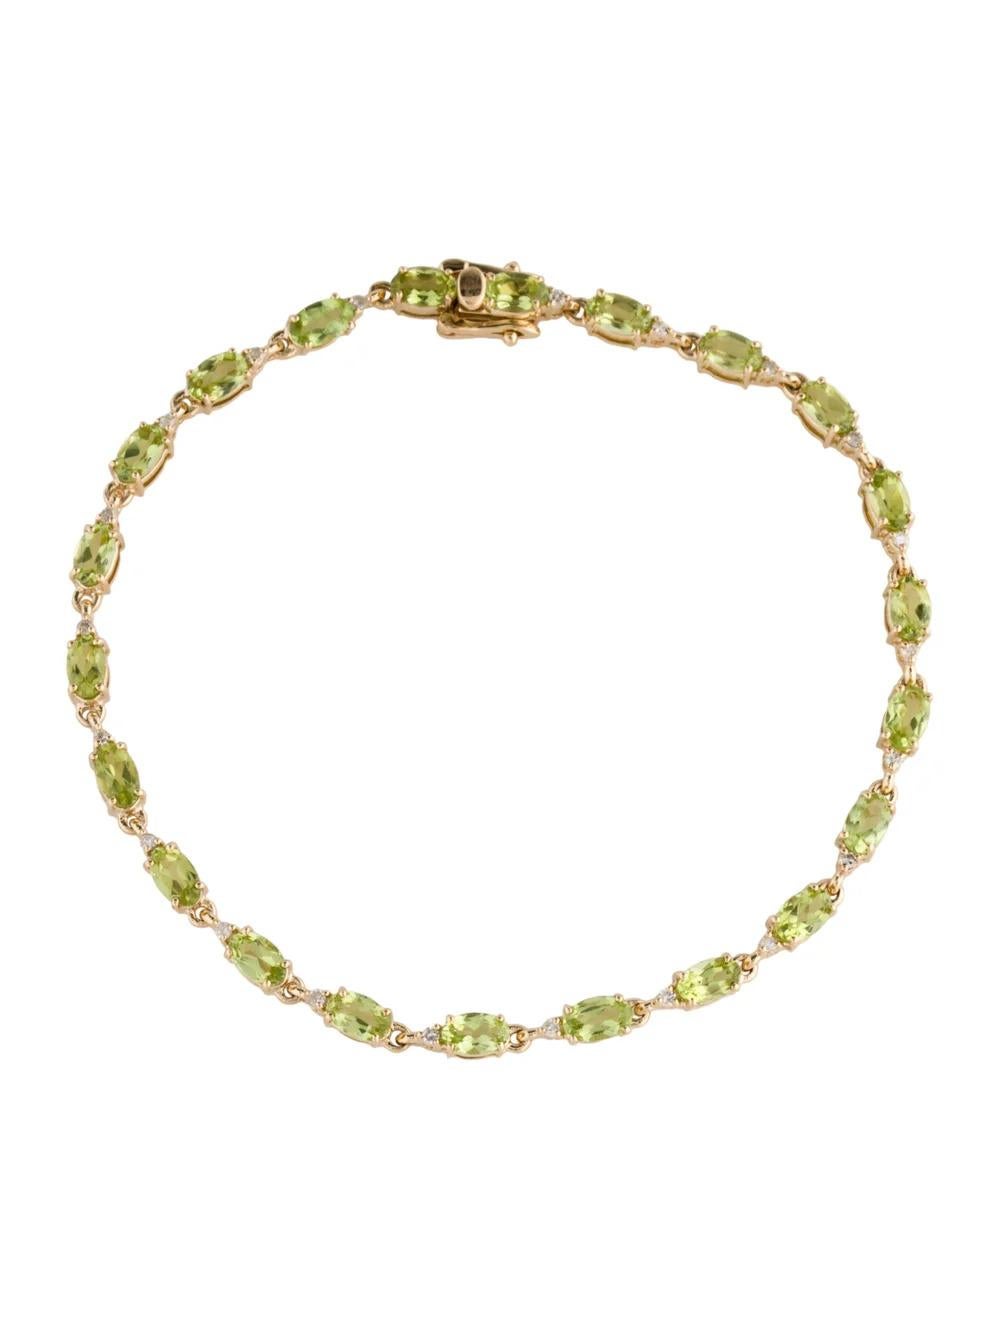 Elevate your wrist with this exquisite 14K Yellow Gold Peridot & Diamond Link Bracelet. Featuring a stunning 5.50 Carat Oval Brilliant Peridot, this bracelet exudes elegance and charm.

Specifications:

* Material: 14K Yellow Gold
* Inside